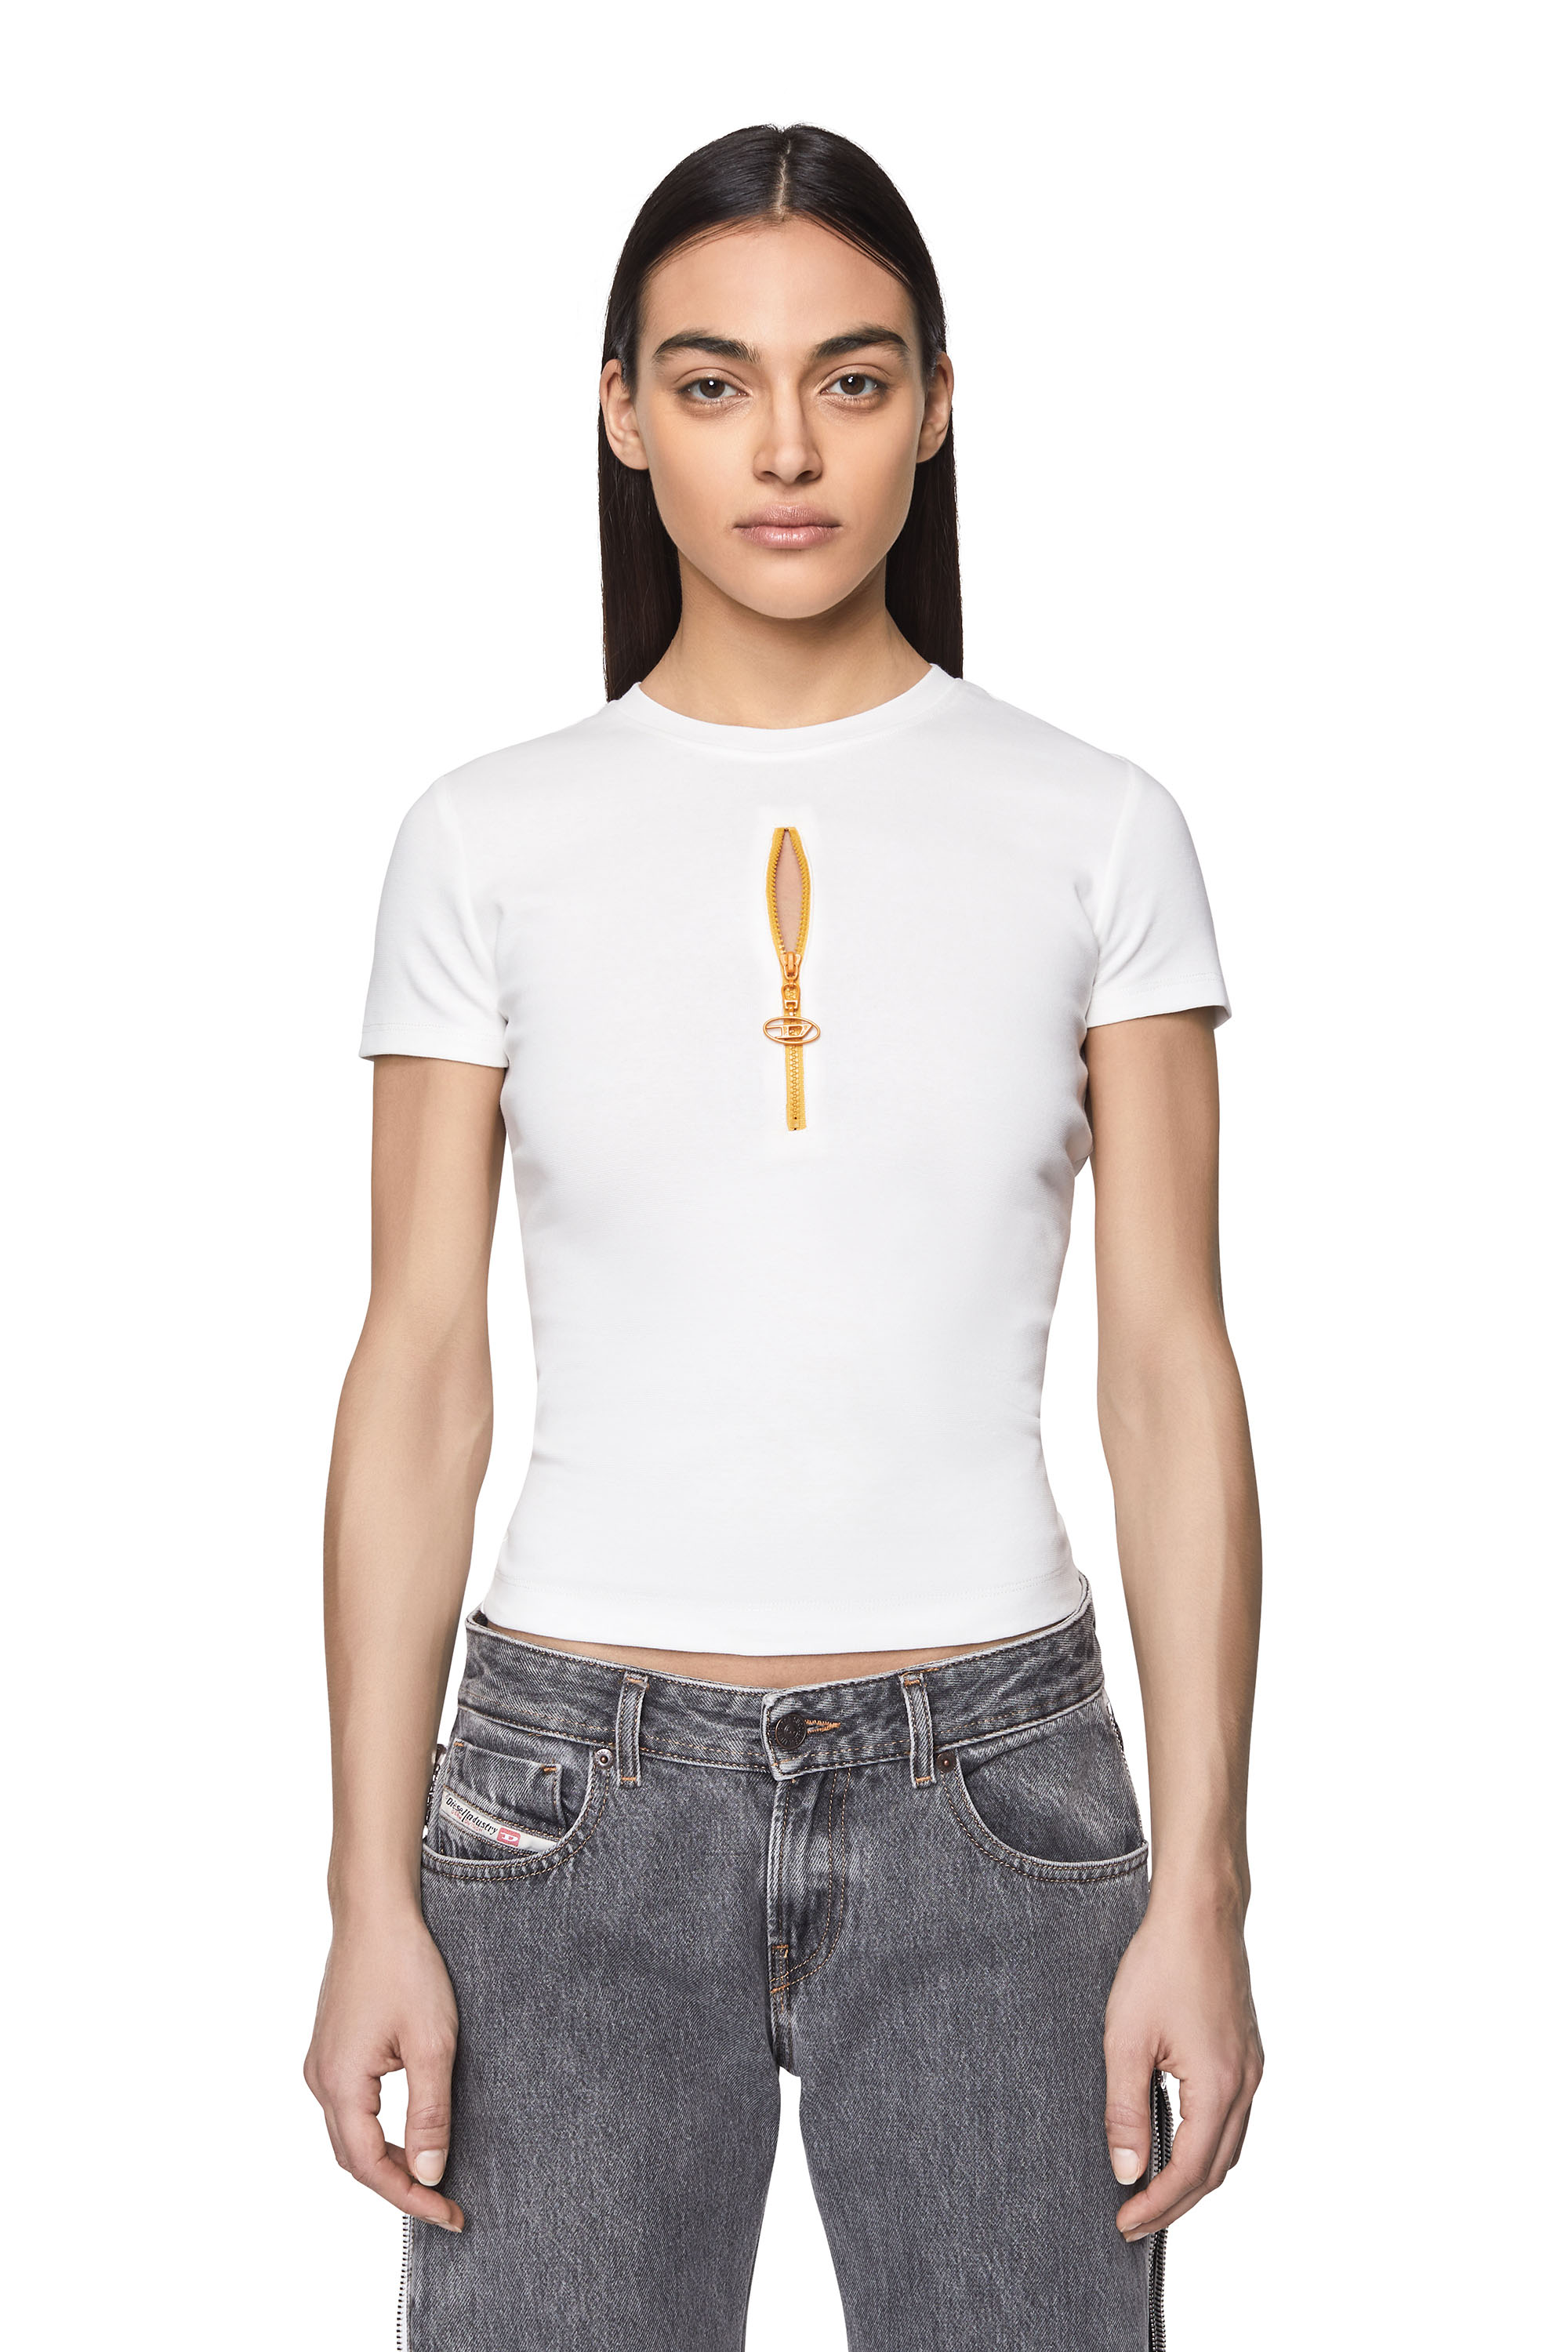 Diesel - T-VAZY, White/Yellow - Image 1